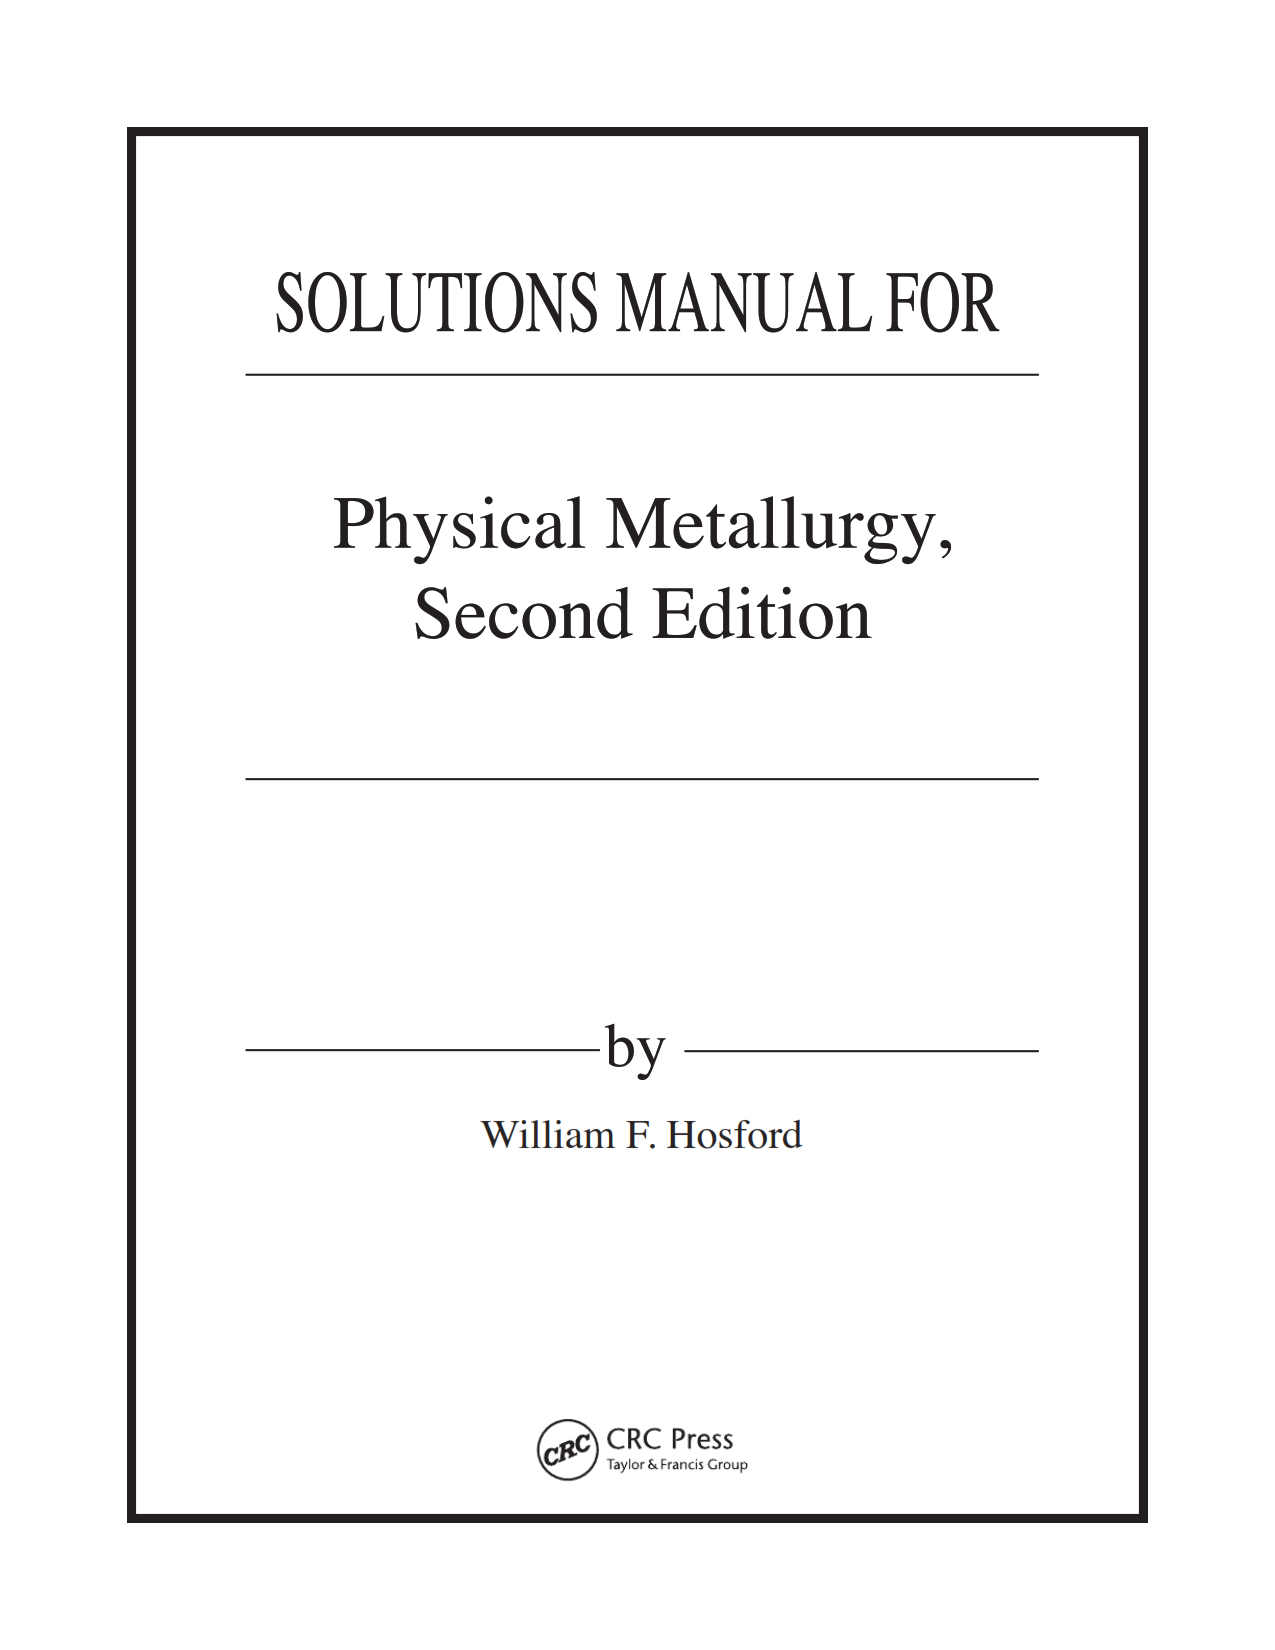 download free physical metallurgy William F Hosford 2nd ( second ) edition solution manual pdf | problem answers